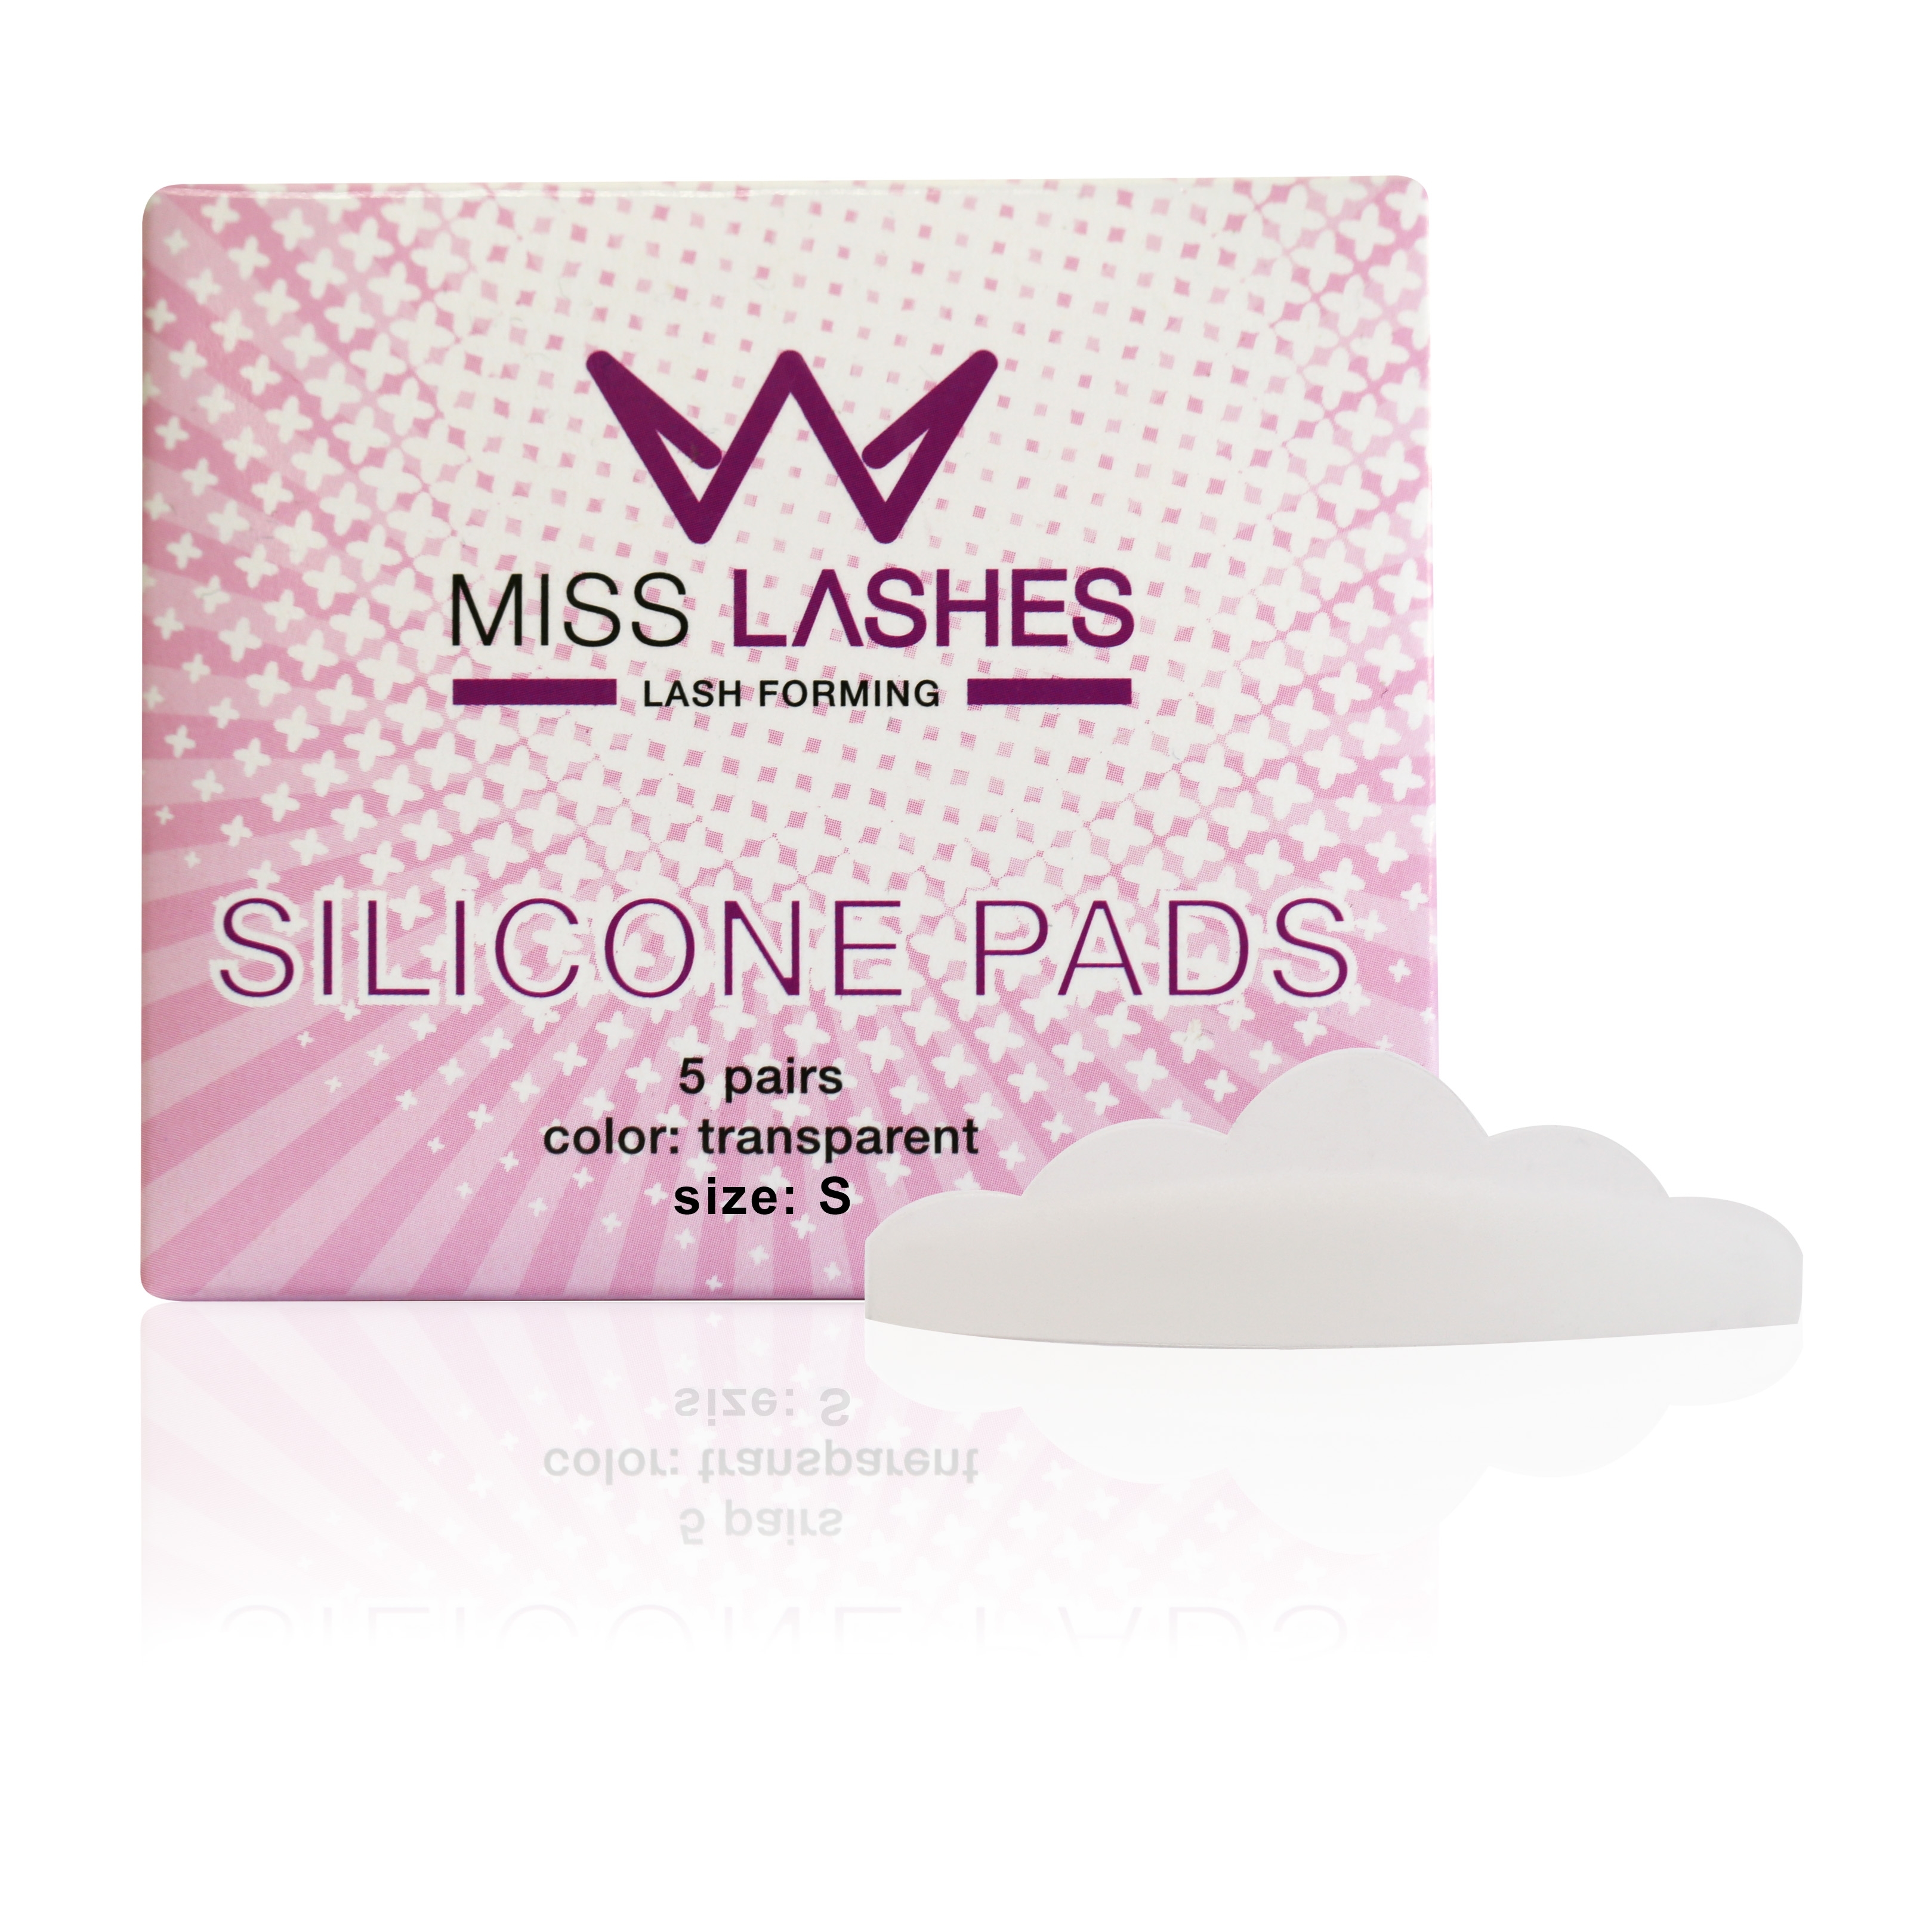 MISS LASHES Silikon Pads transparent S 5 Paare